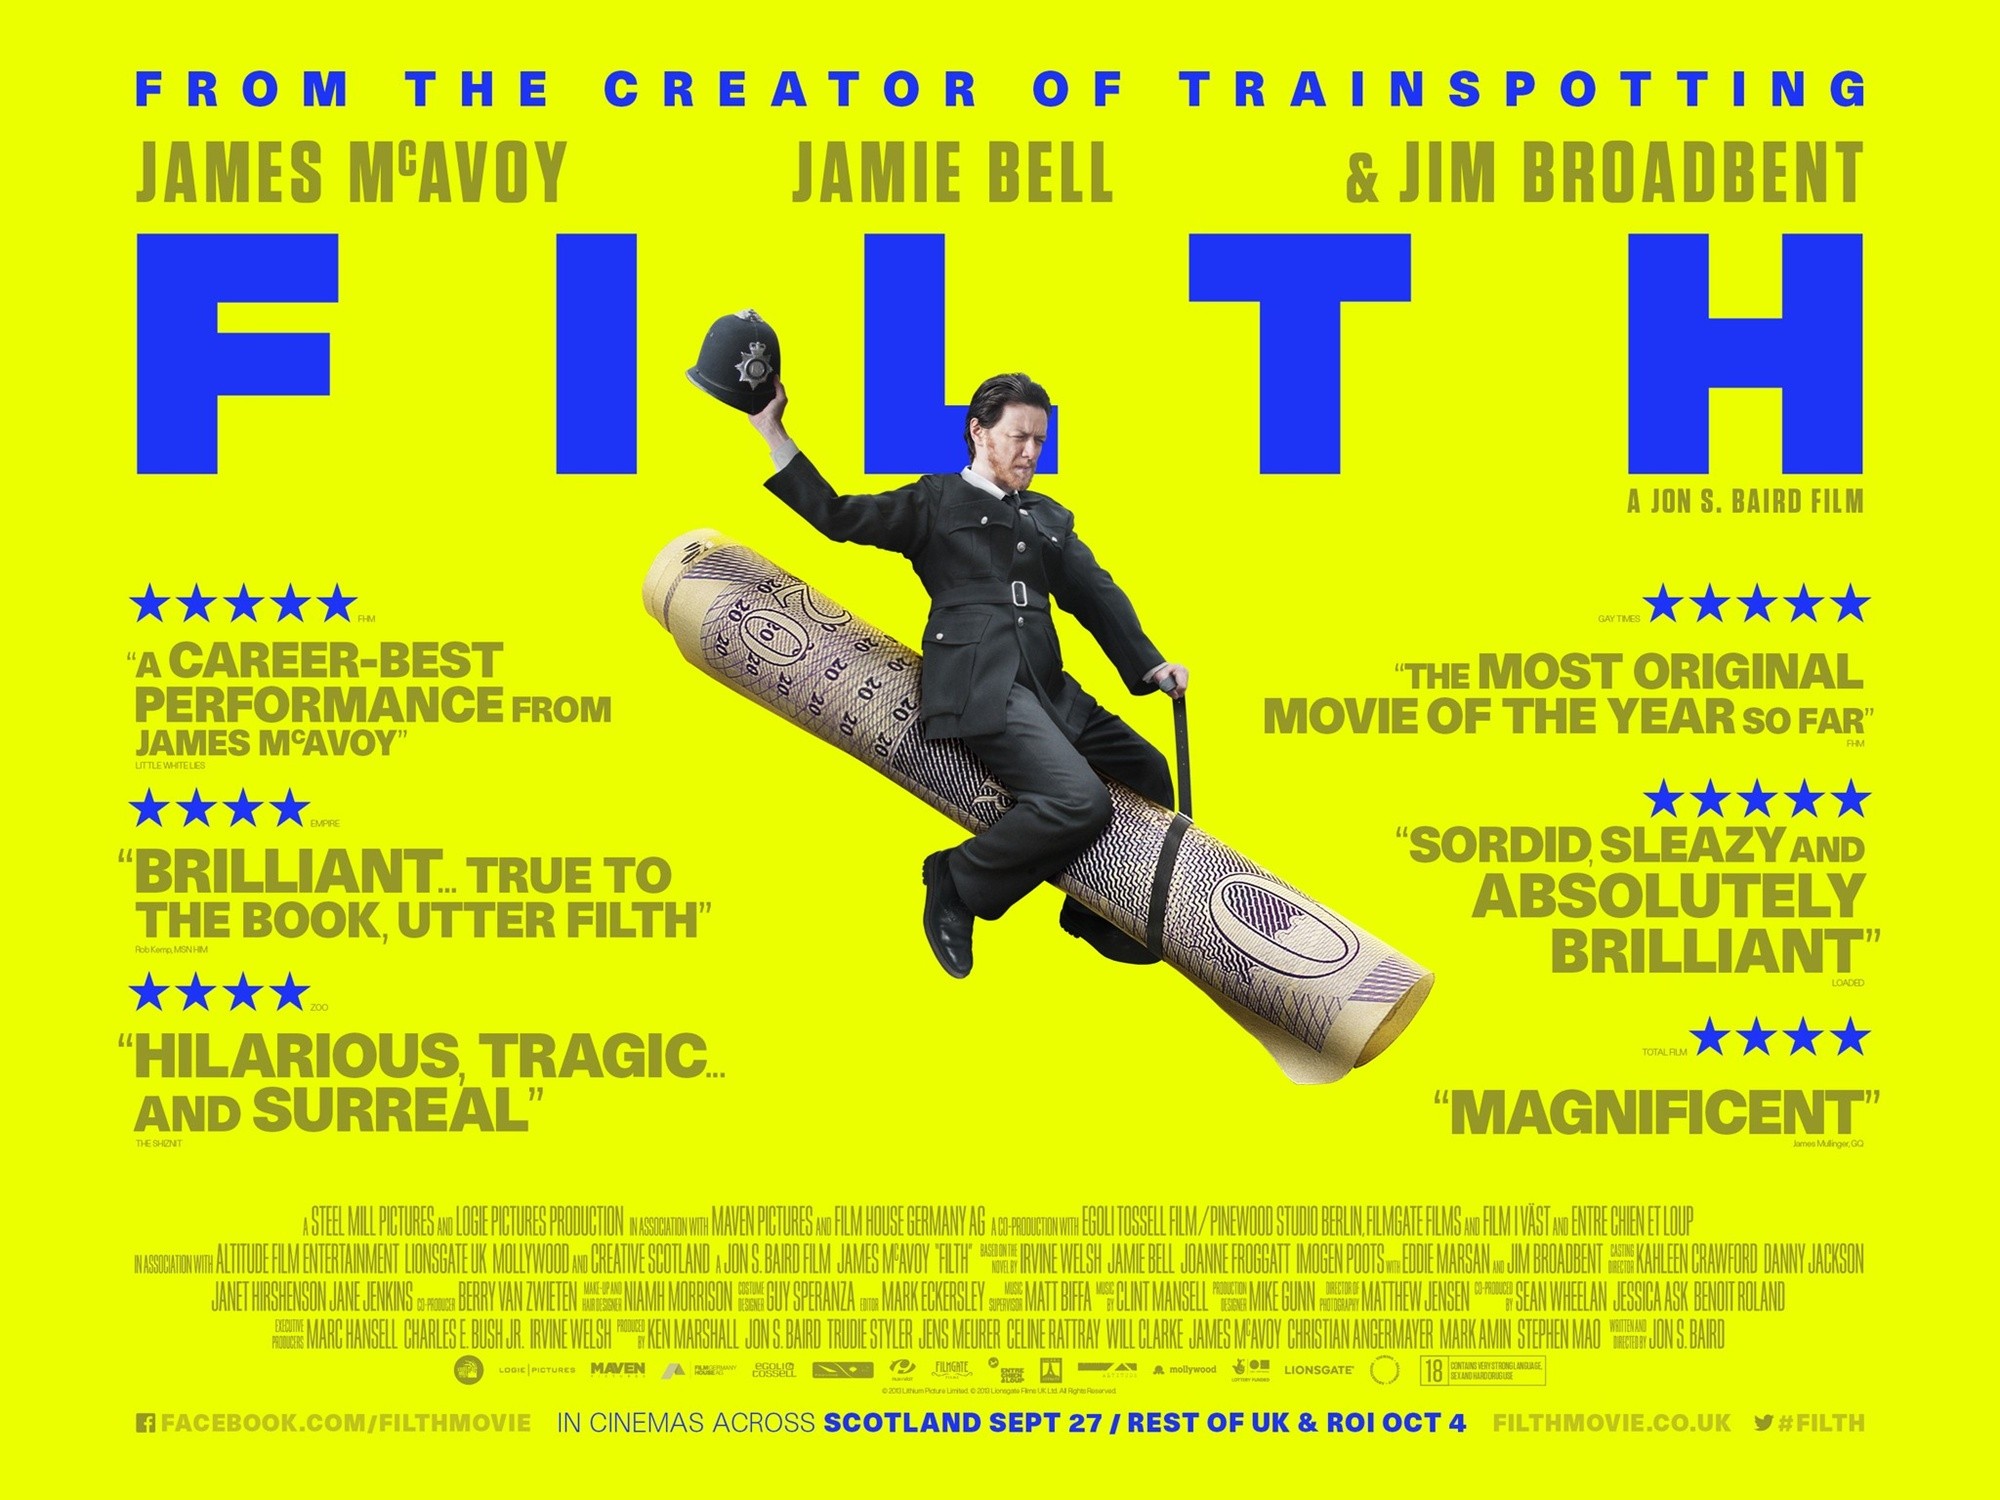 Poster of Magnolia Pictures' Filth (2014)